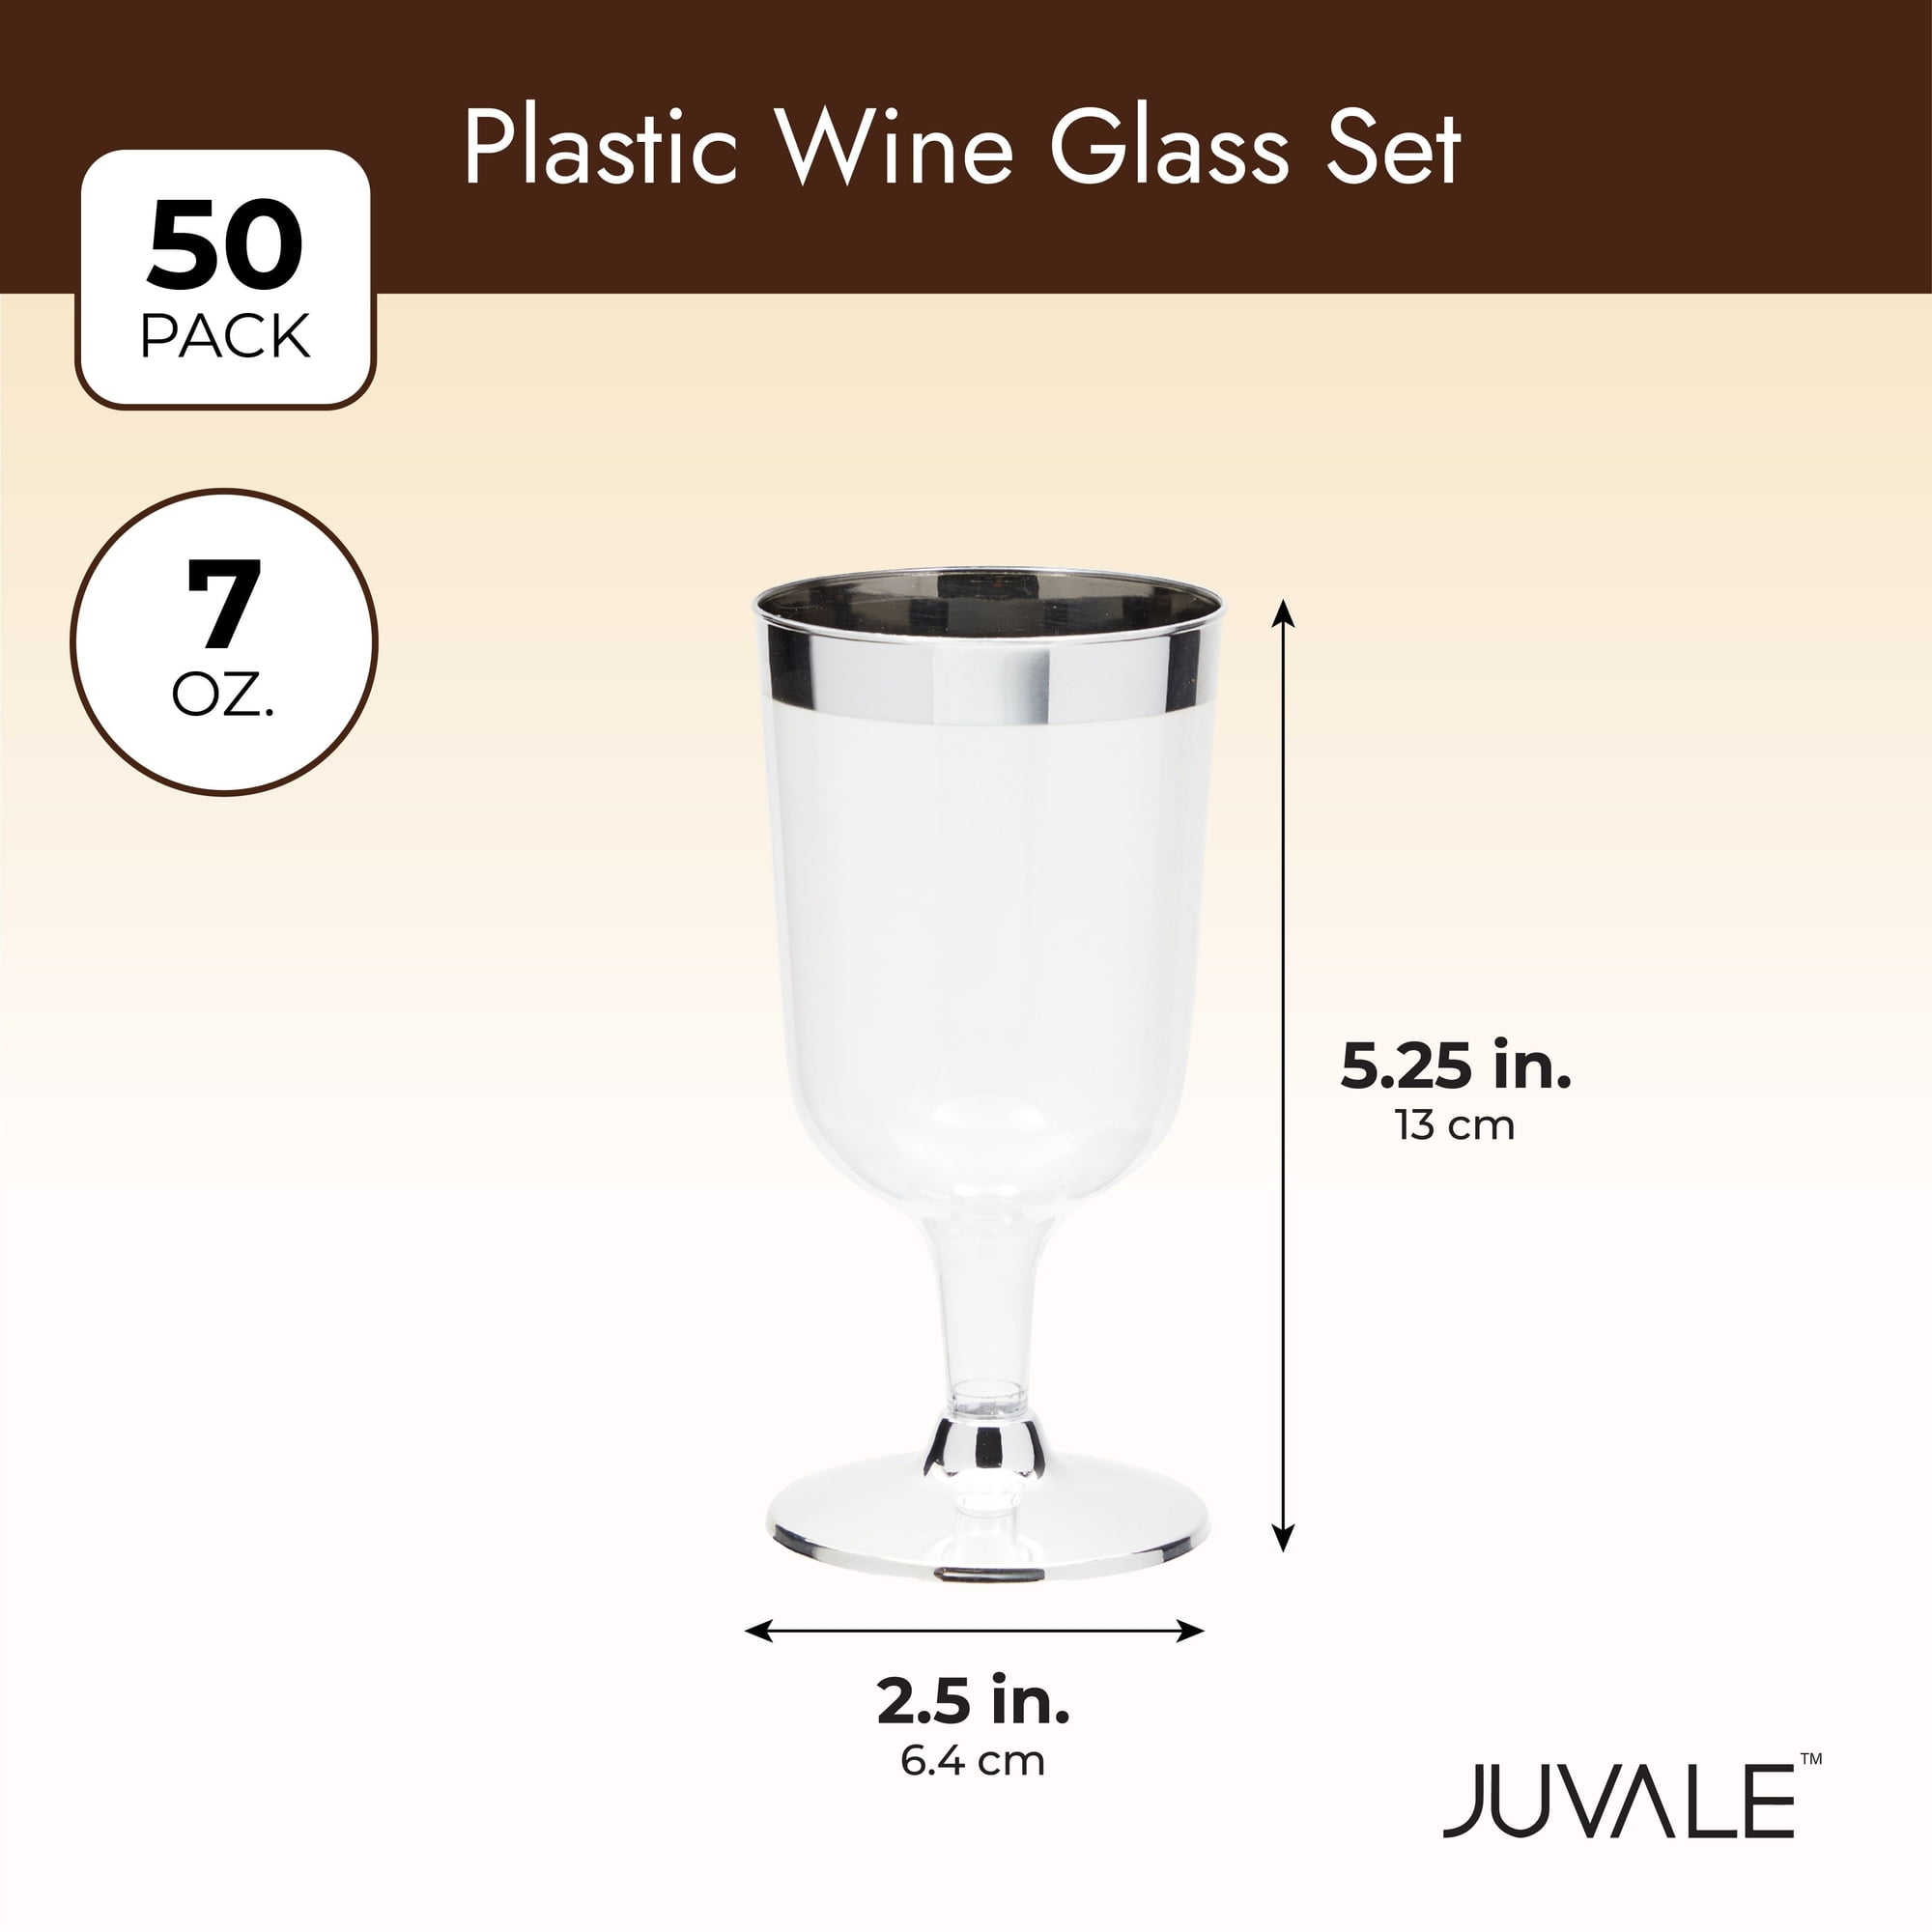 JoyServe Bulk 7 oz Plastic Disposable Wine Glasses - (Pack of 24) Clear  BPA-Free Plastic Wine Glasses with Stem and Party Drinking Glass Cups for  Parties, Weddings, Toasts, Food Samples, Catering - Yahoo Shopping